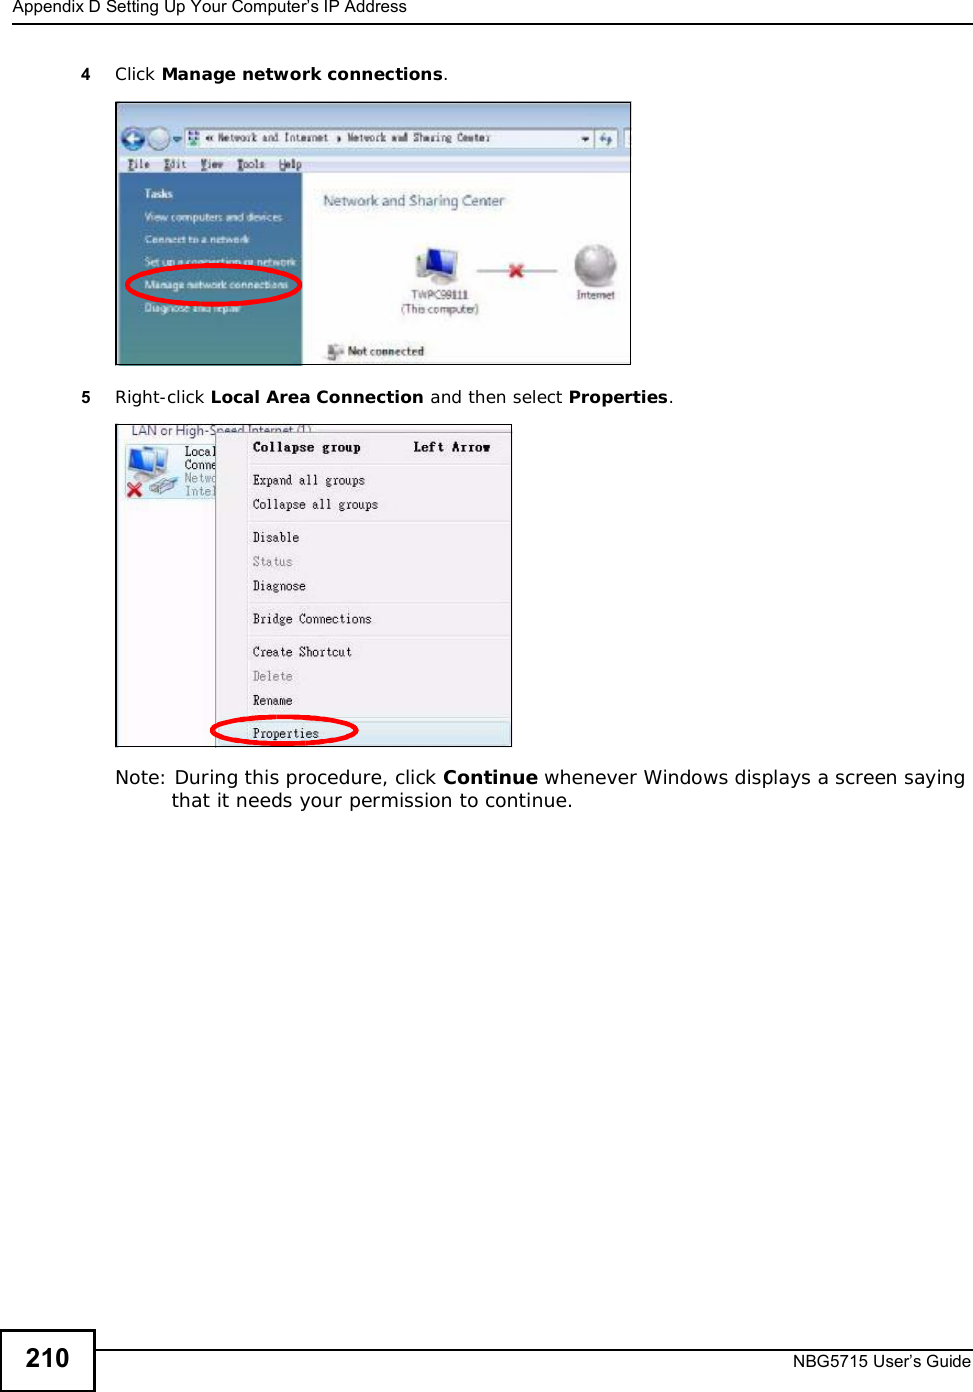 Appendix DSetting Up Your Computer’s IP AddressNBG5715 User’s Guide2104Click Manage network connections.5Right-click Local Area Connection and then select Properties.Note: During this procedure, click Continue whenever Windows displays a screen saying that it needs your permission to continue.